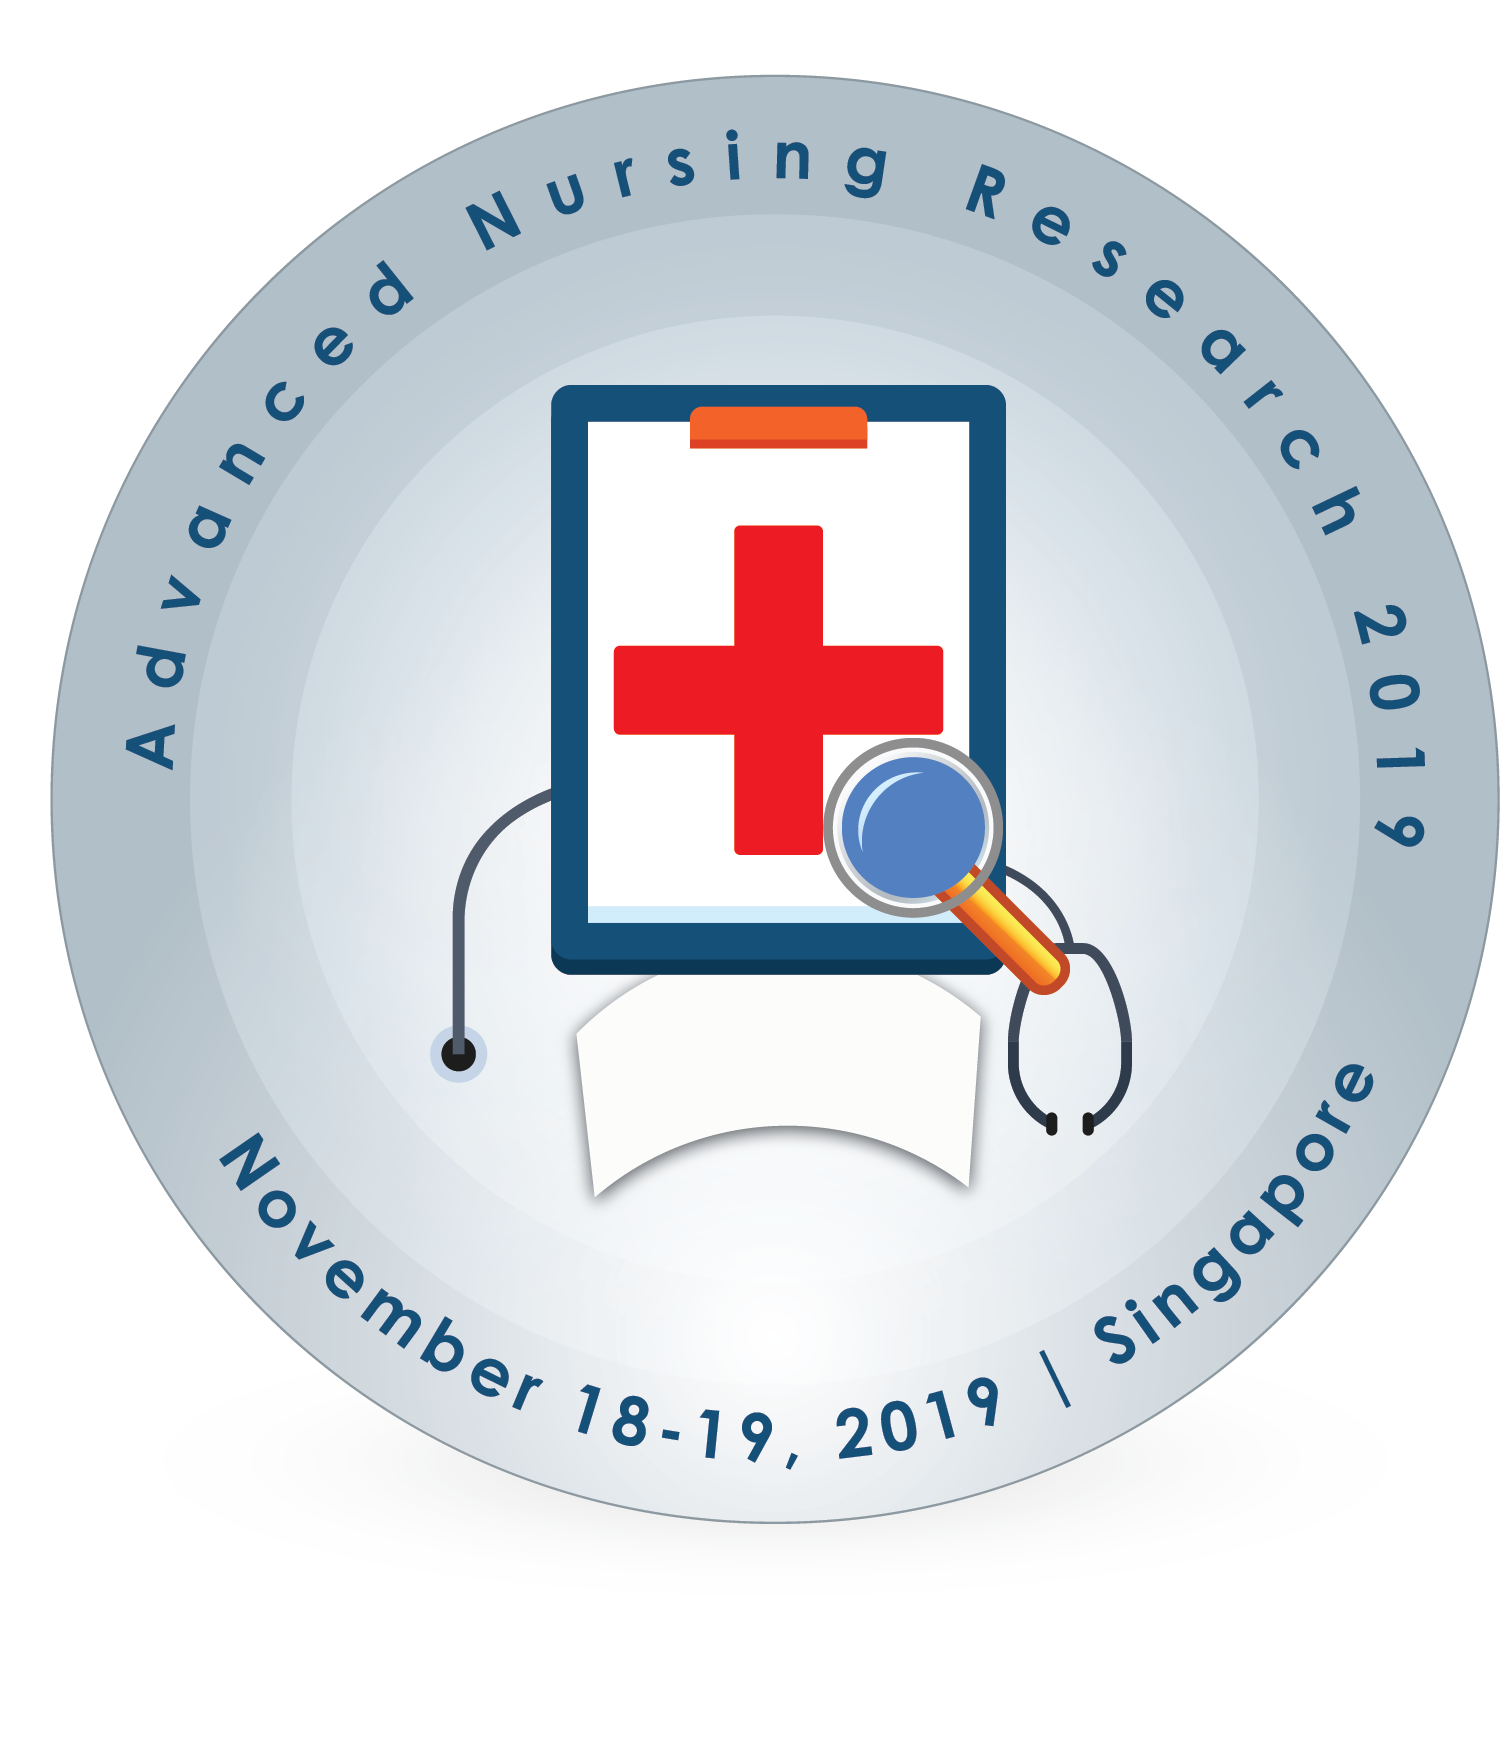 28th World Congress on Advanced Nursing Research and Healthcare (CNE Credits)